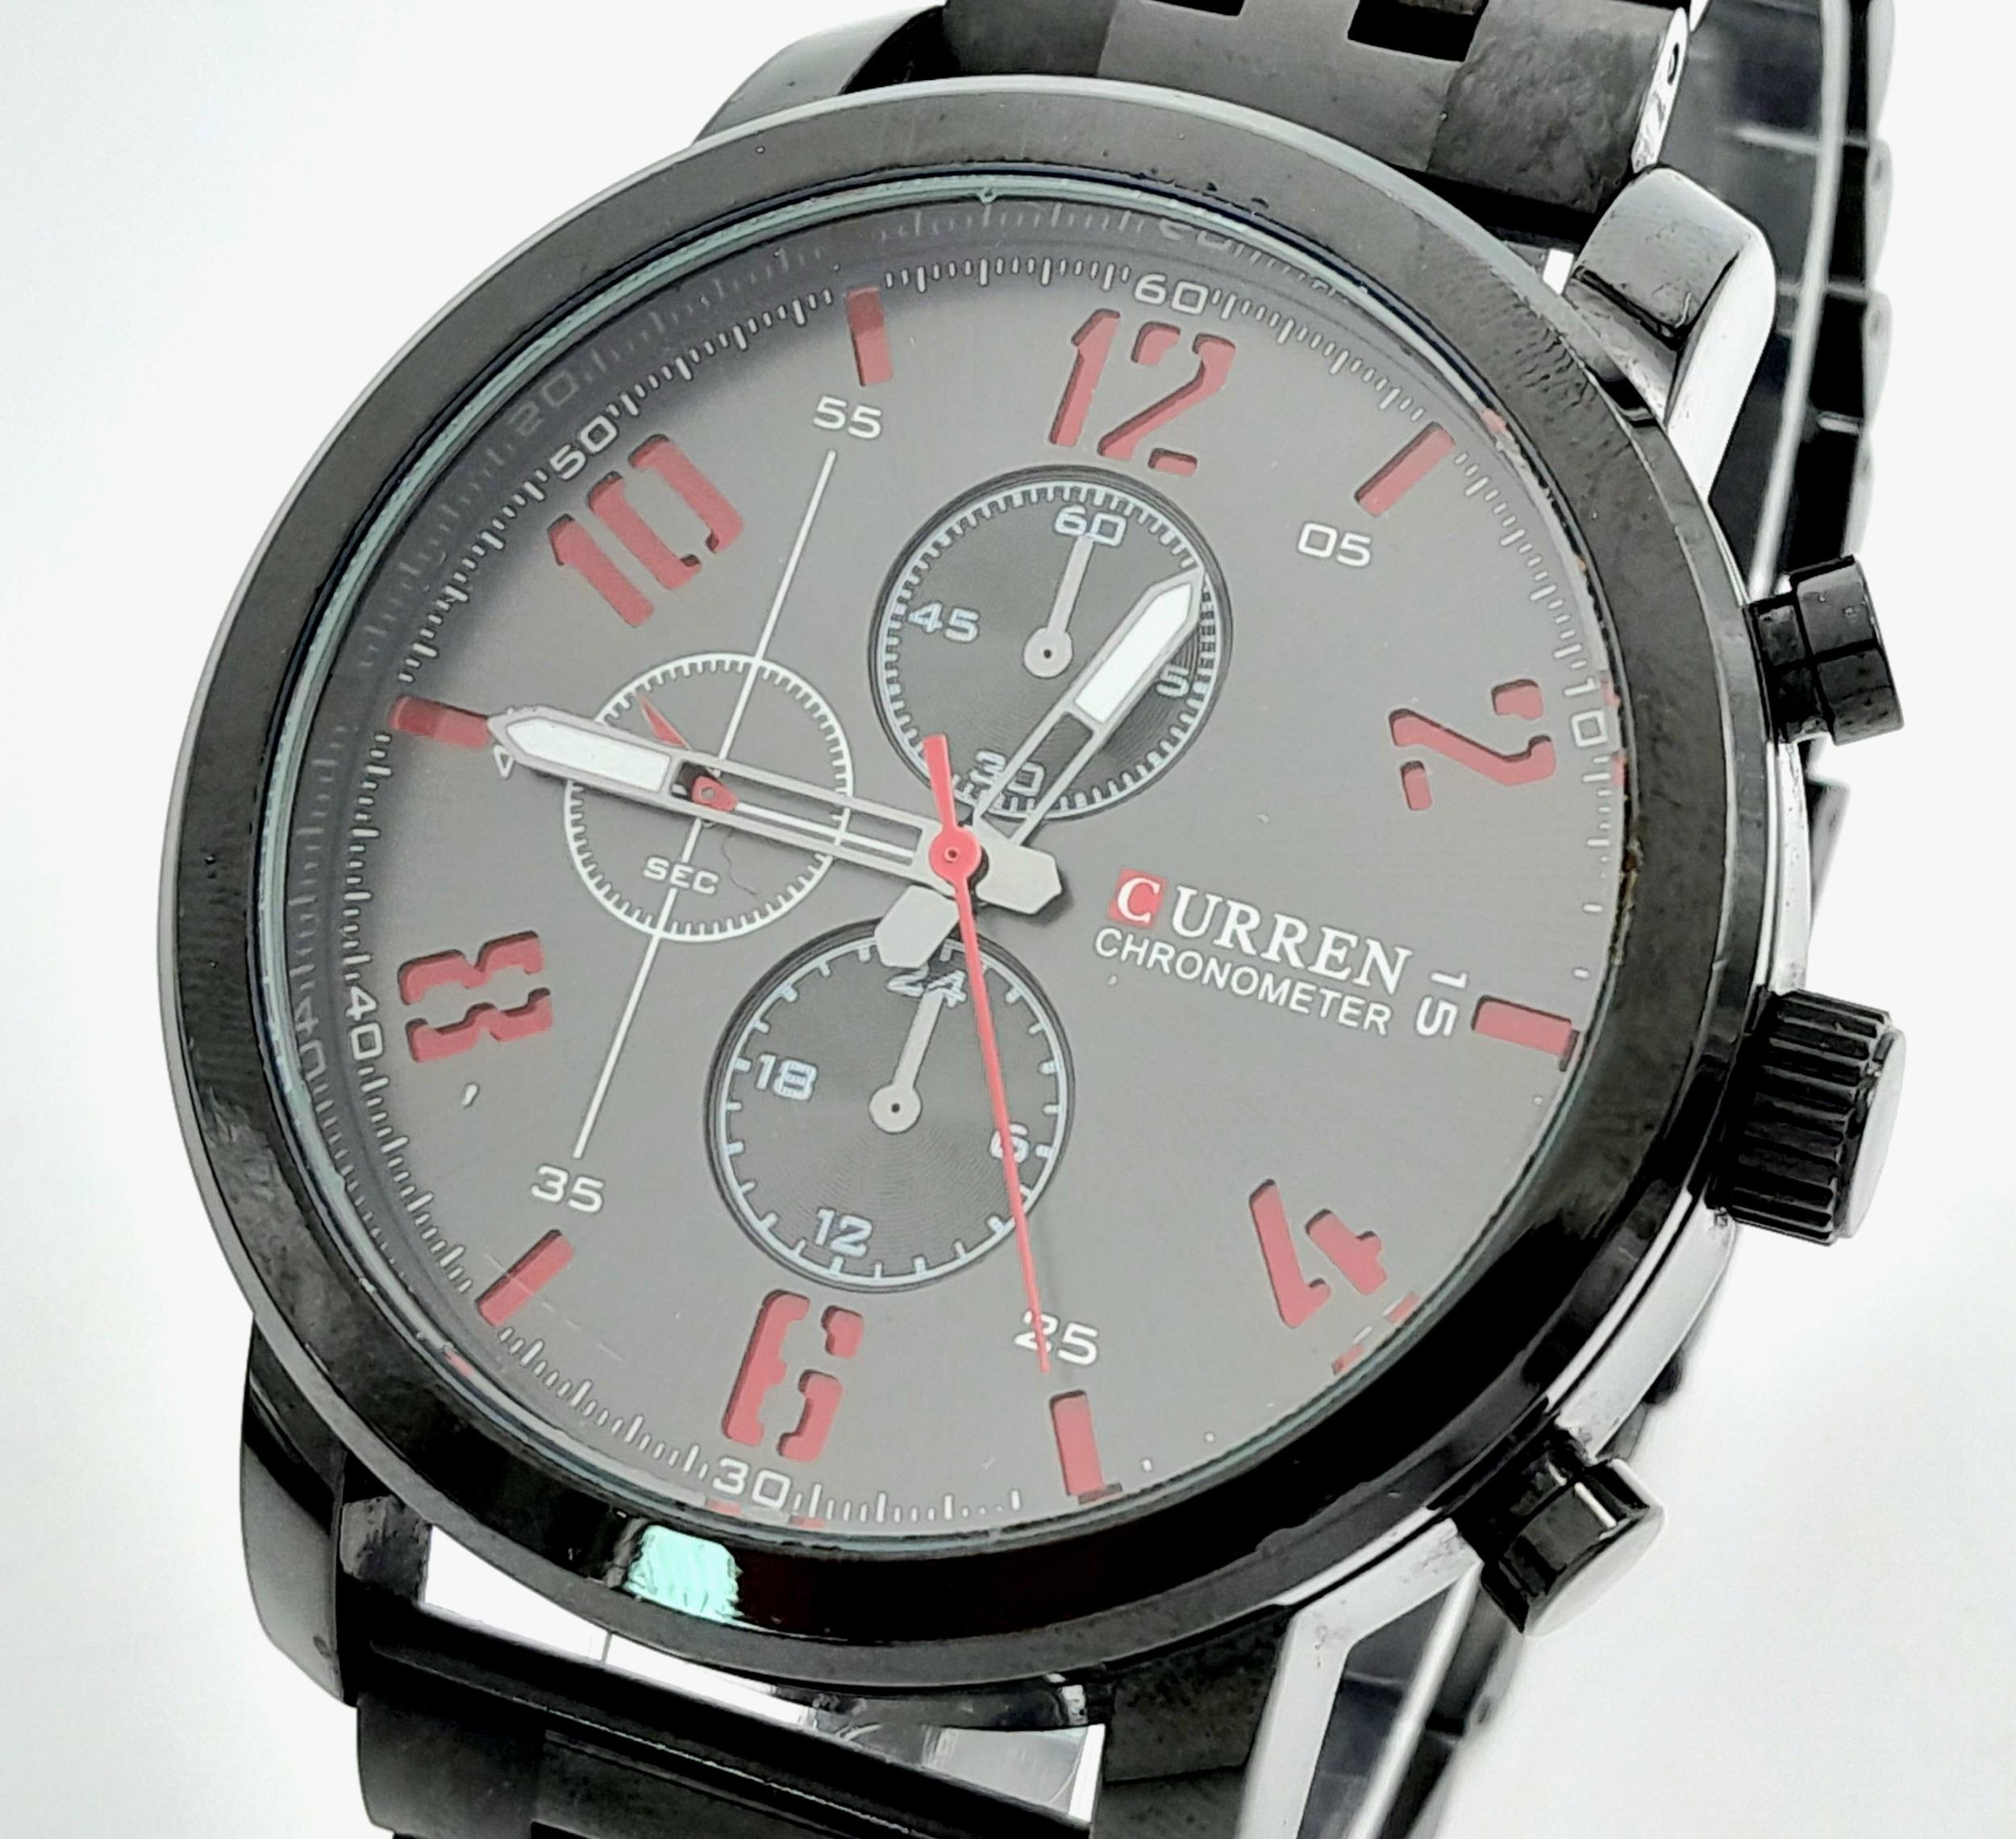 An Excellent Condition Men’s Oversize Chronometer Watch by Curren (45mm Case). New Battery Fitted - Image 2 of 6